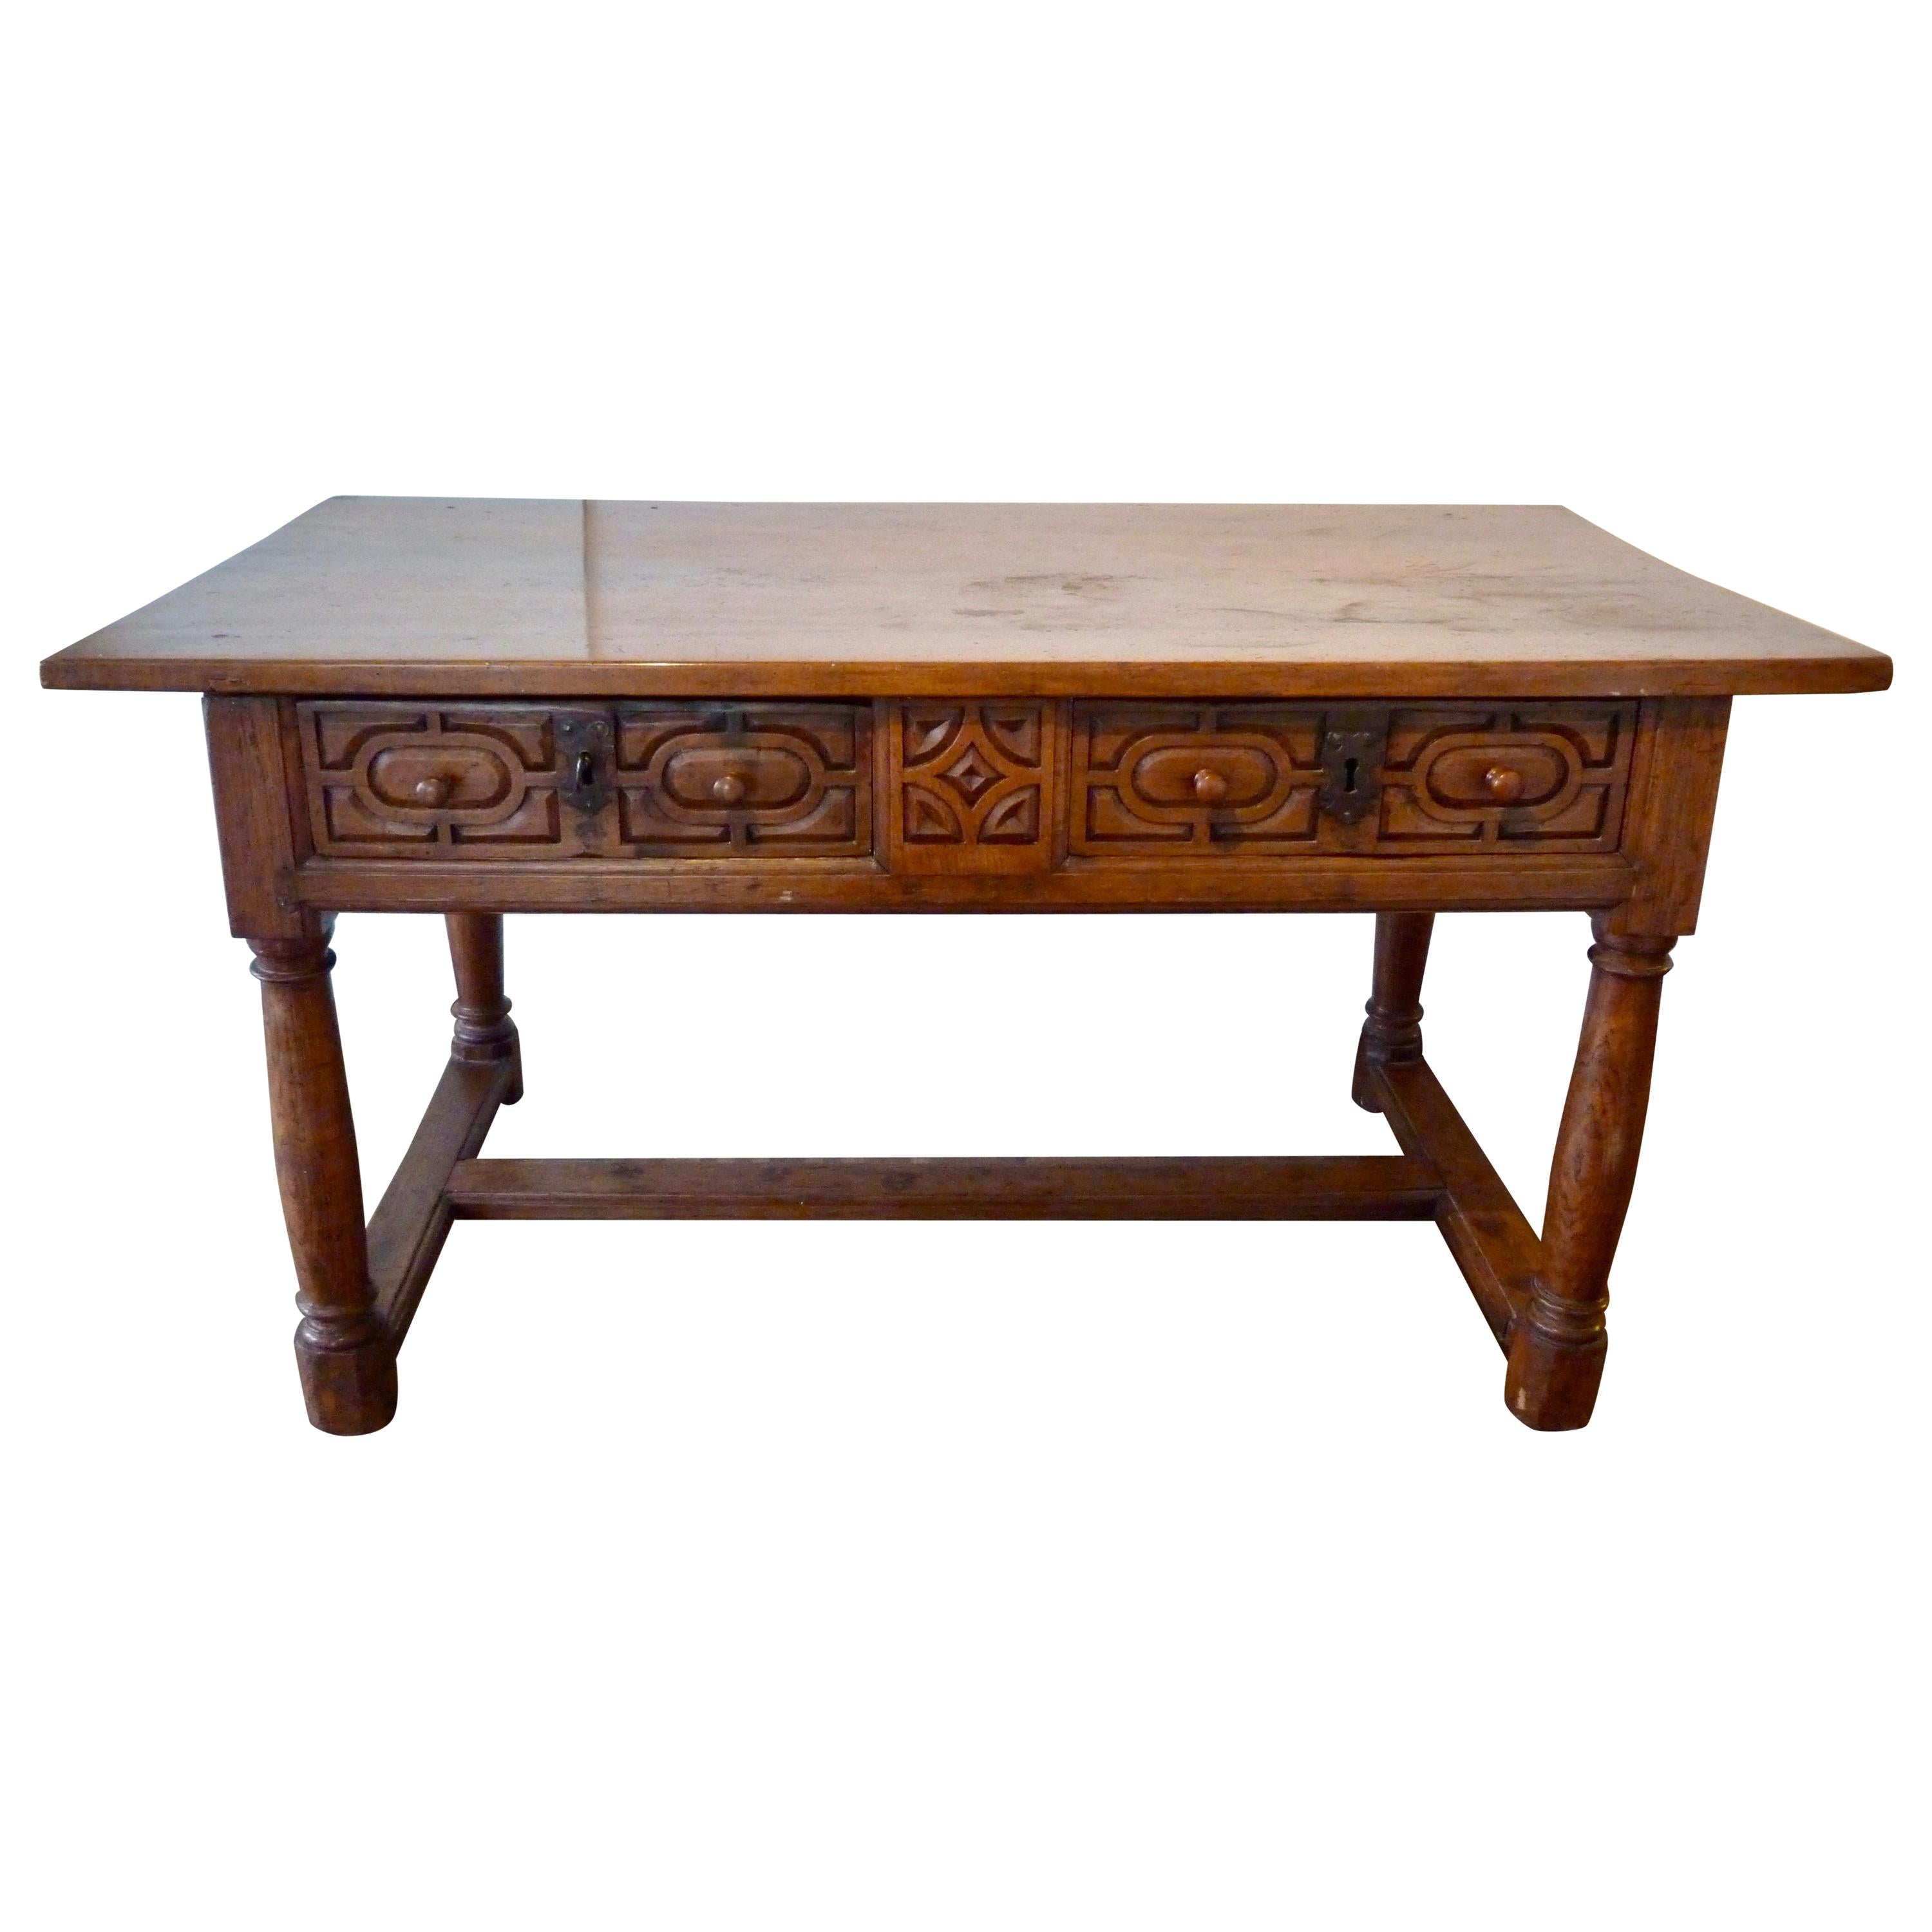 Spanish Baroque Walnut Desk Table, Late 17th Century For Sale